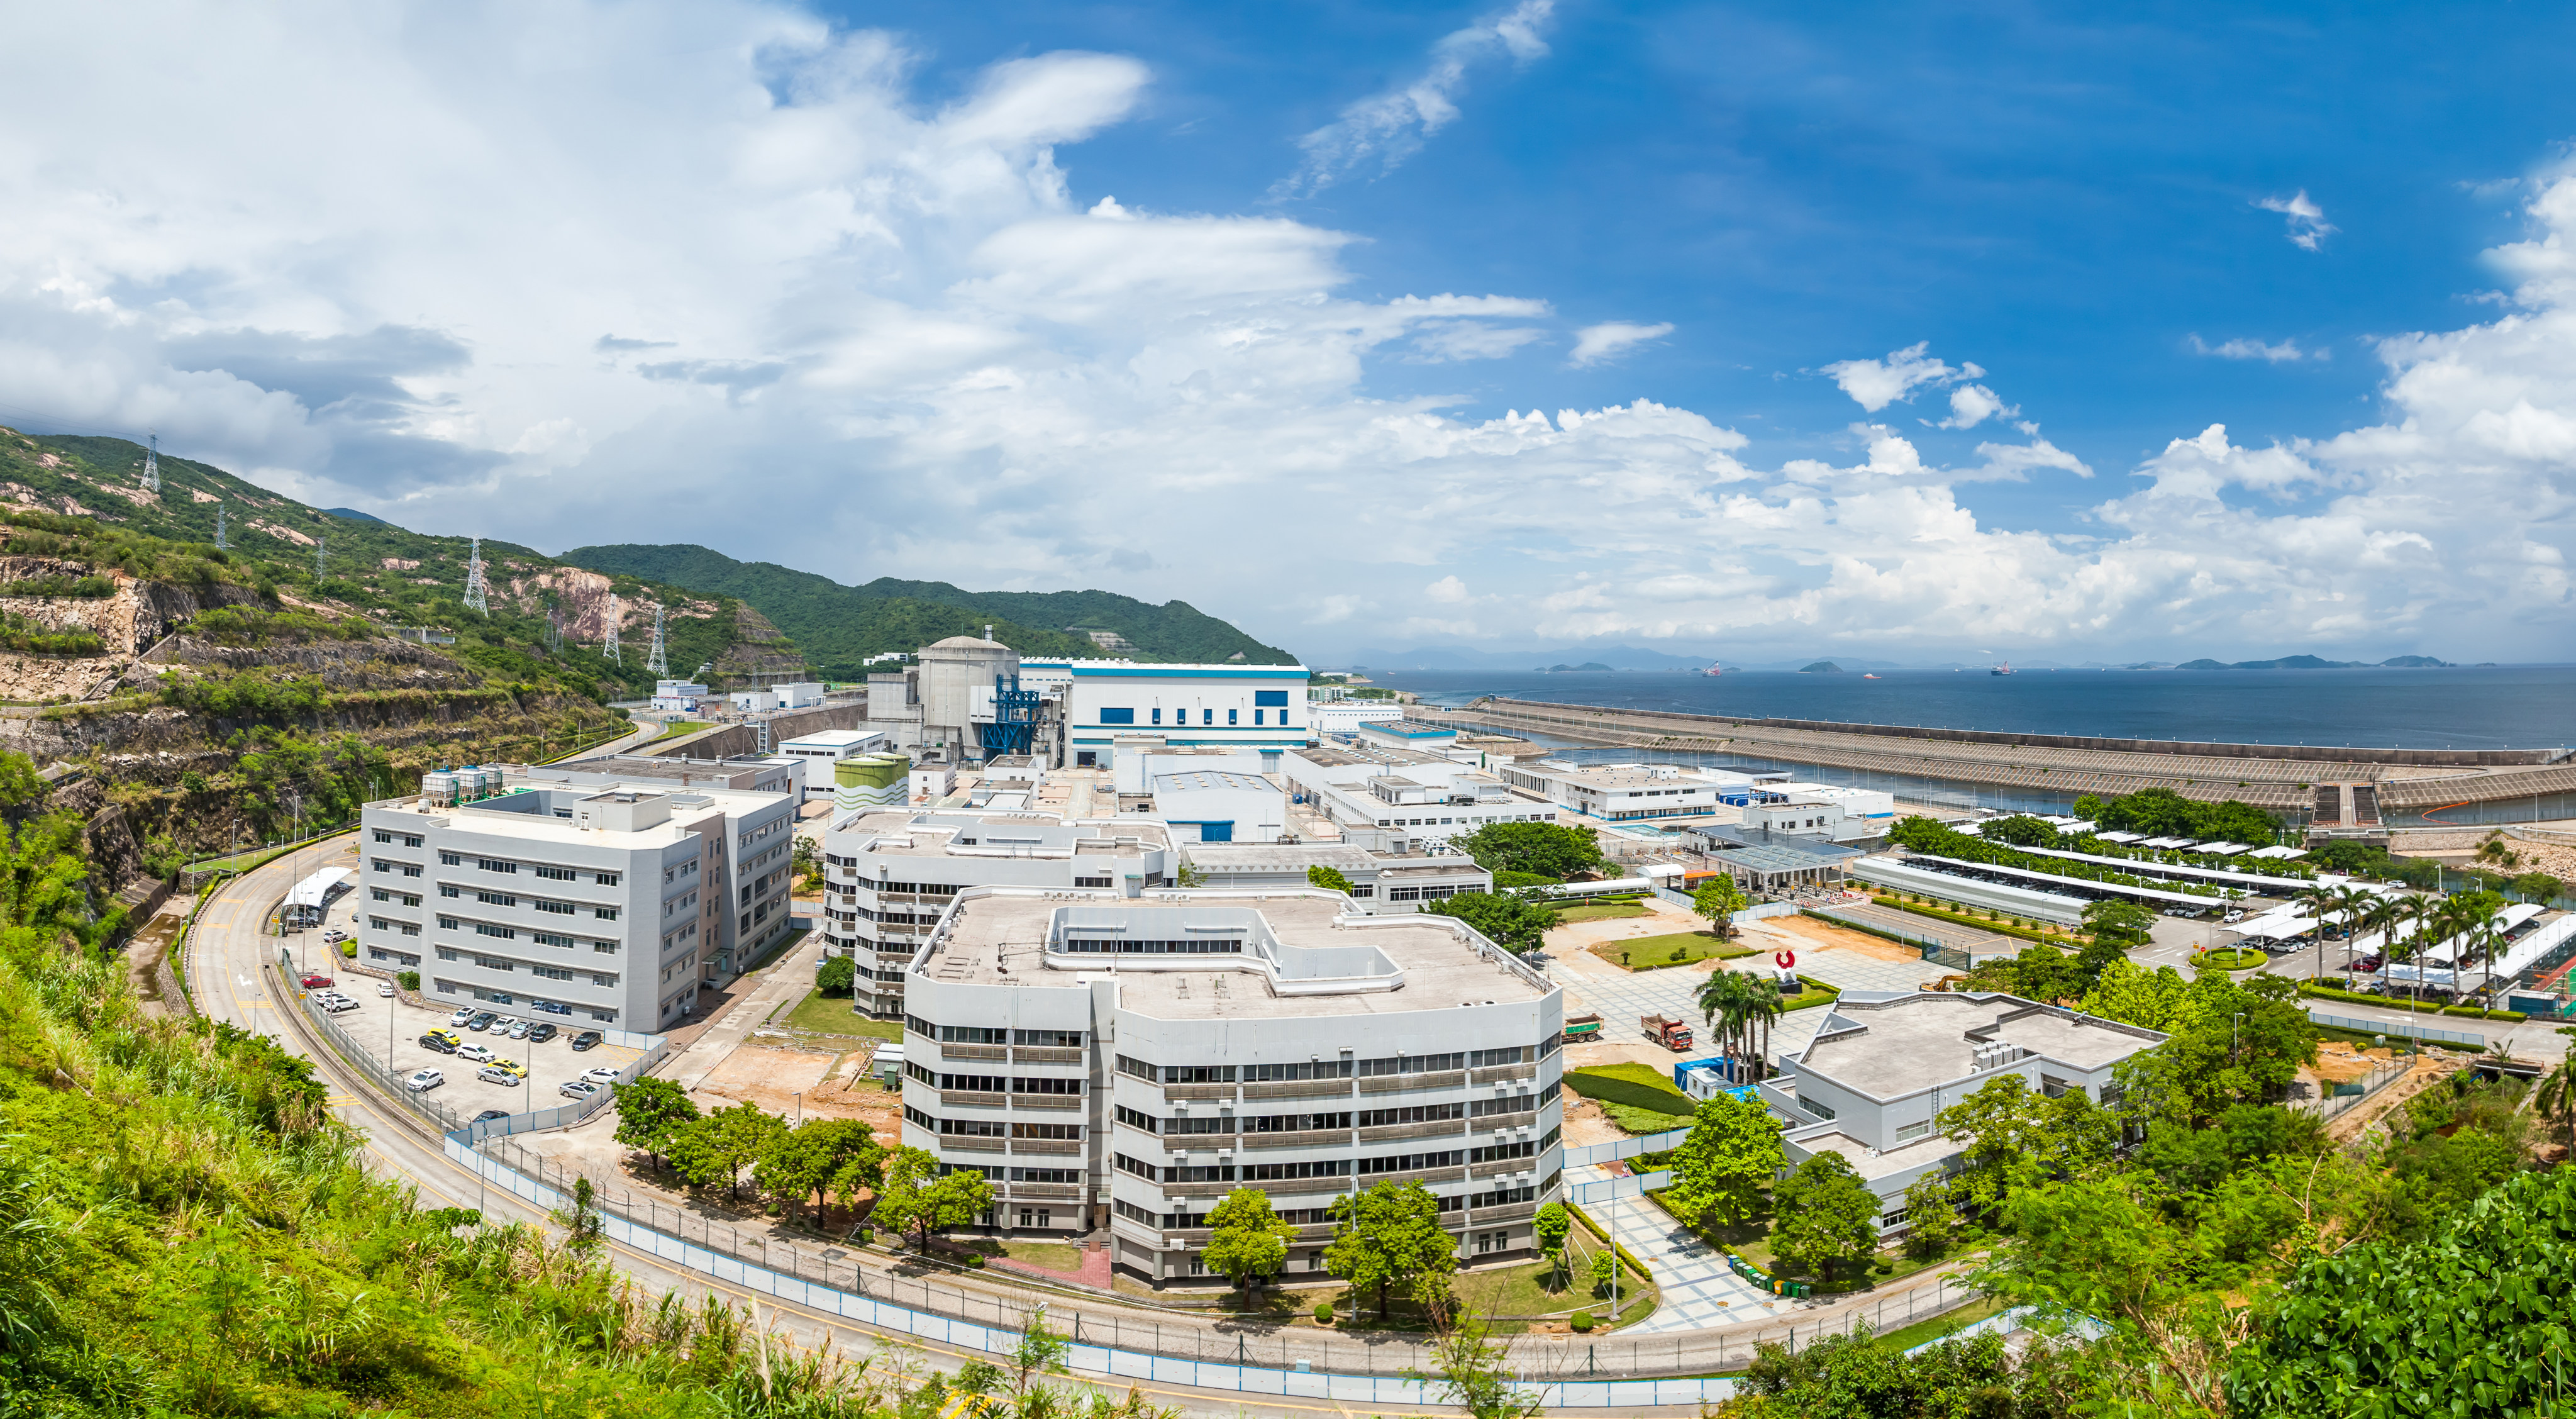 Daya Bay nuclear power plant in mainland China makes up 25 per cent of Hong Kong’s fuel mix.  Photo: Shutterstock Images